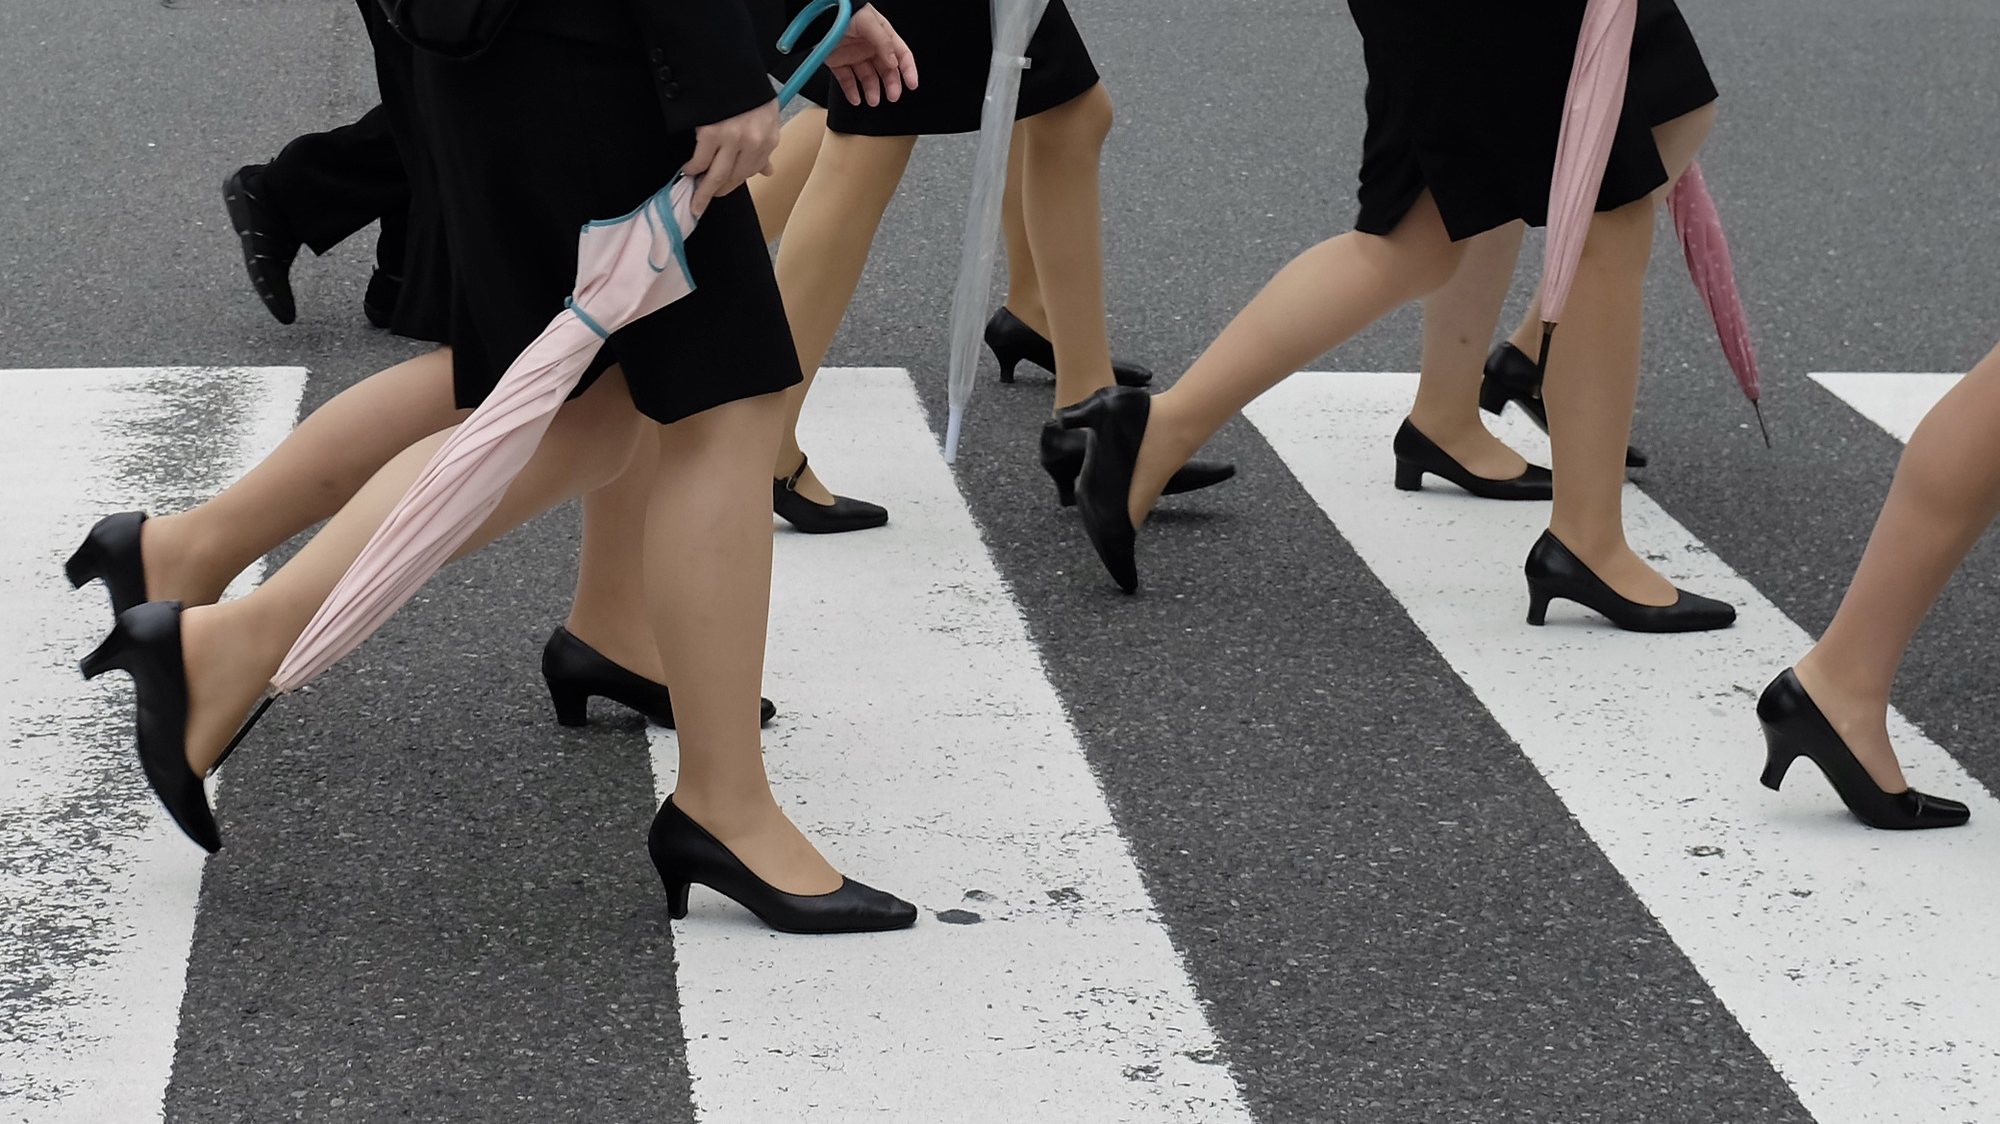 epa07435736 (FILE) - Young women wearing dark suits worn by new employees cross a street in Tokyo, Japan, 01 October 2013 (reissued 14 March 2019). According to media reports, as a budding movement to address inequality in the workplace develops in Japan, some women are campaigning to bring attention in inequities in guidelines for workplace attire, specifically the expectation that women wear high heels to work. The footwear is notorious for being generally uncomfortable and can cause bruising and blisters. The campaign uses the moniker #KuToo - a reference to the #MeToo gender equality movement - which is a fusion of the Japanese words for shoe (kutsu) and pain (kutsuu).  EPA/FRANCK ROBICHON